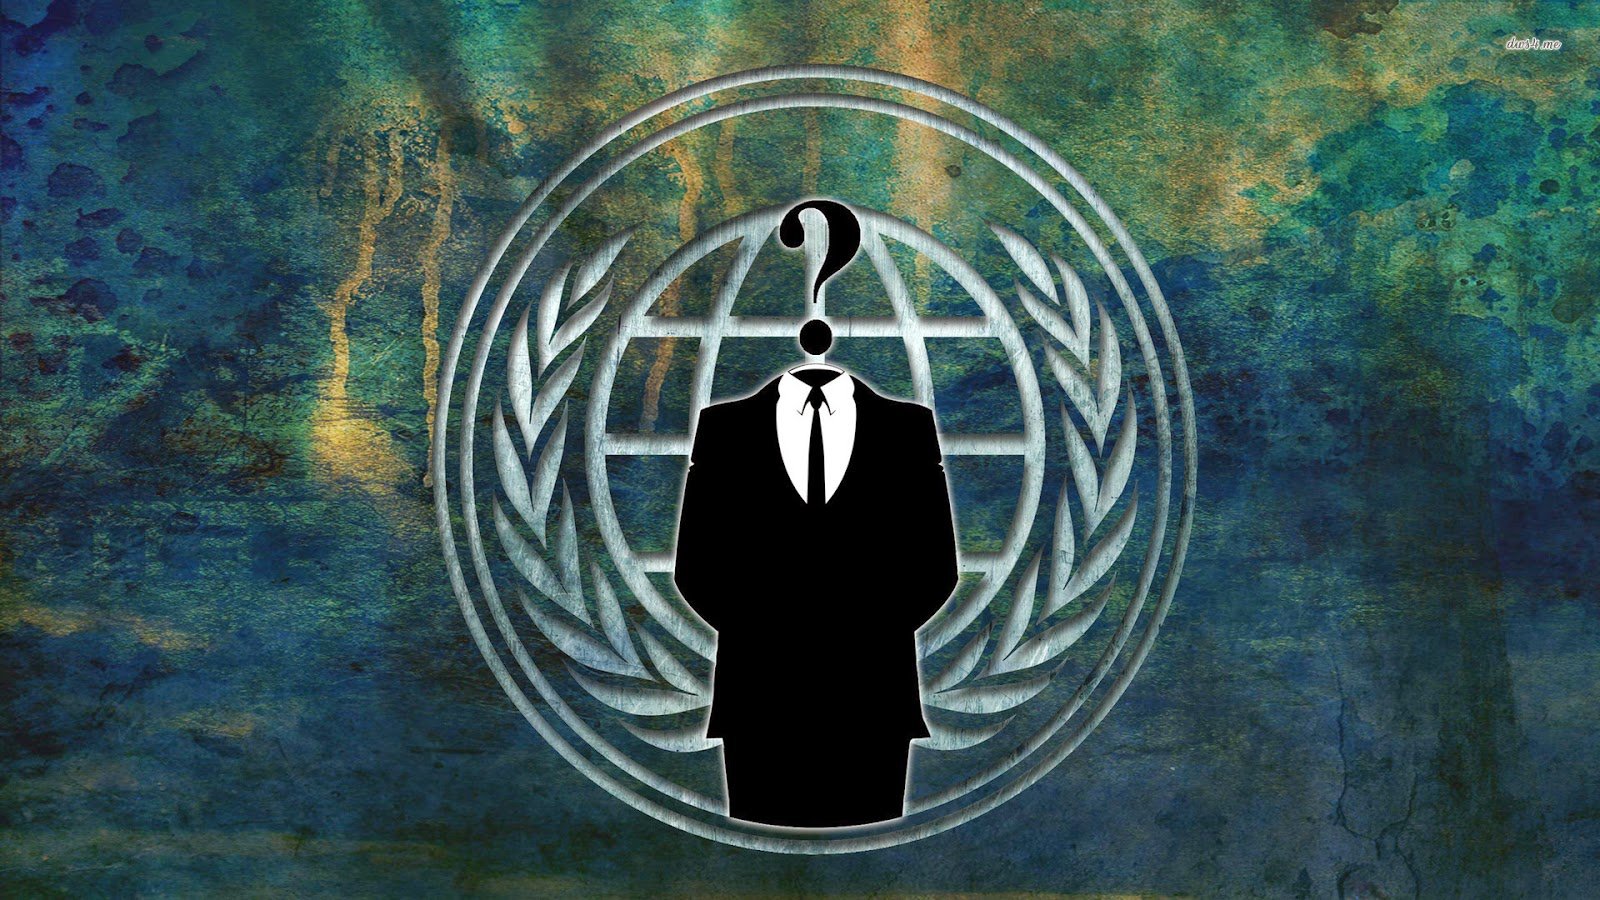 Anonymous Wallpaper Full HD nh Anonymous p 1600x900